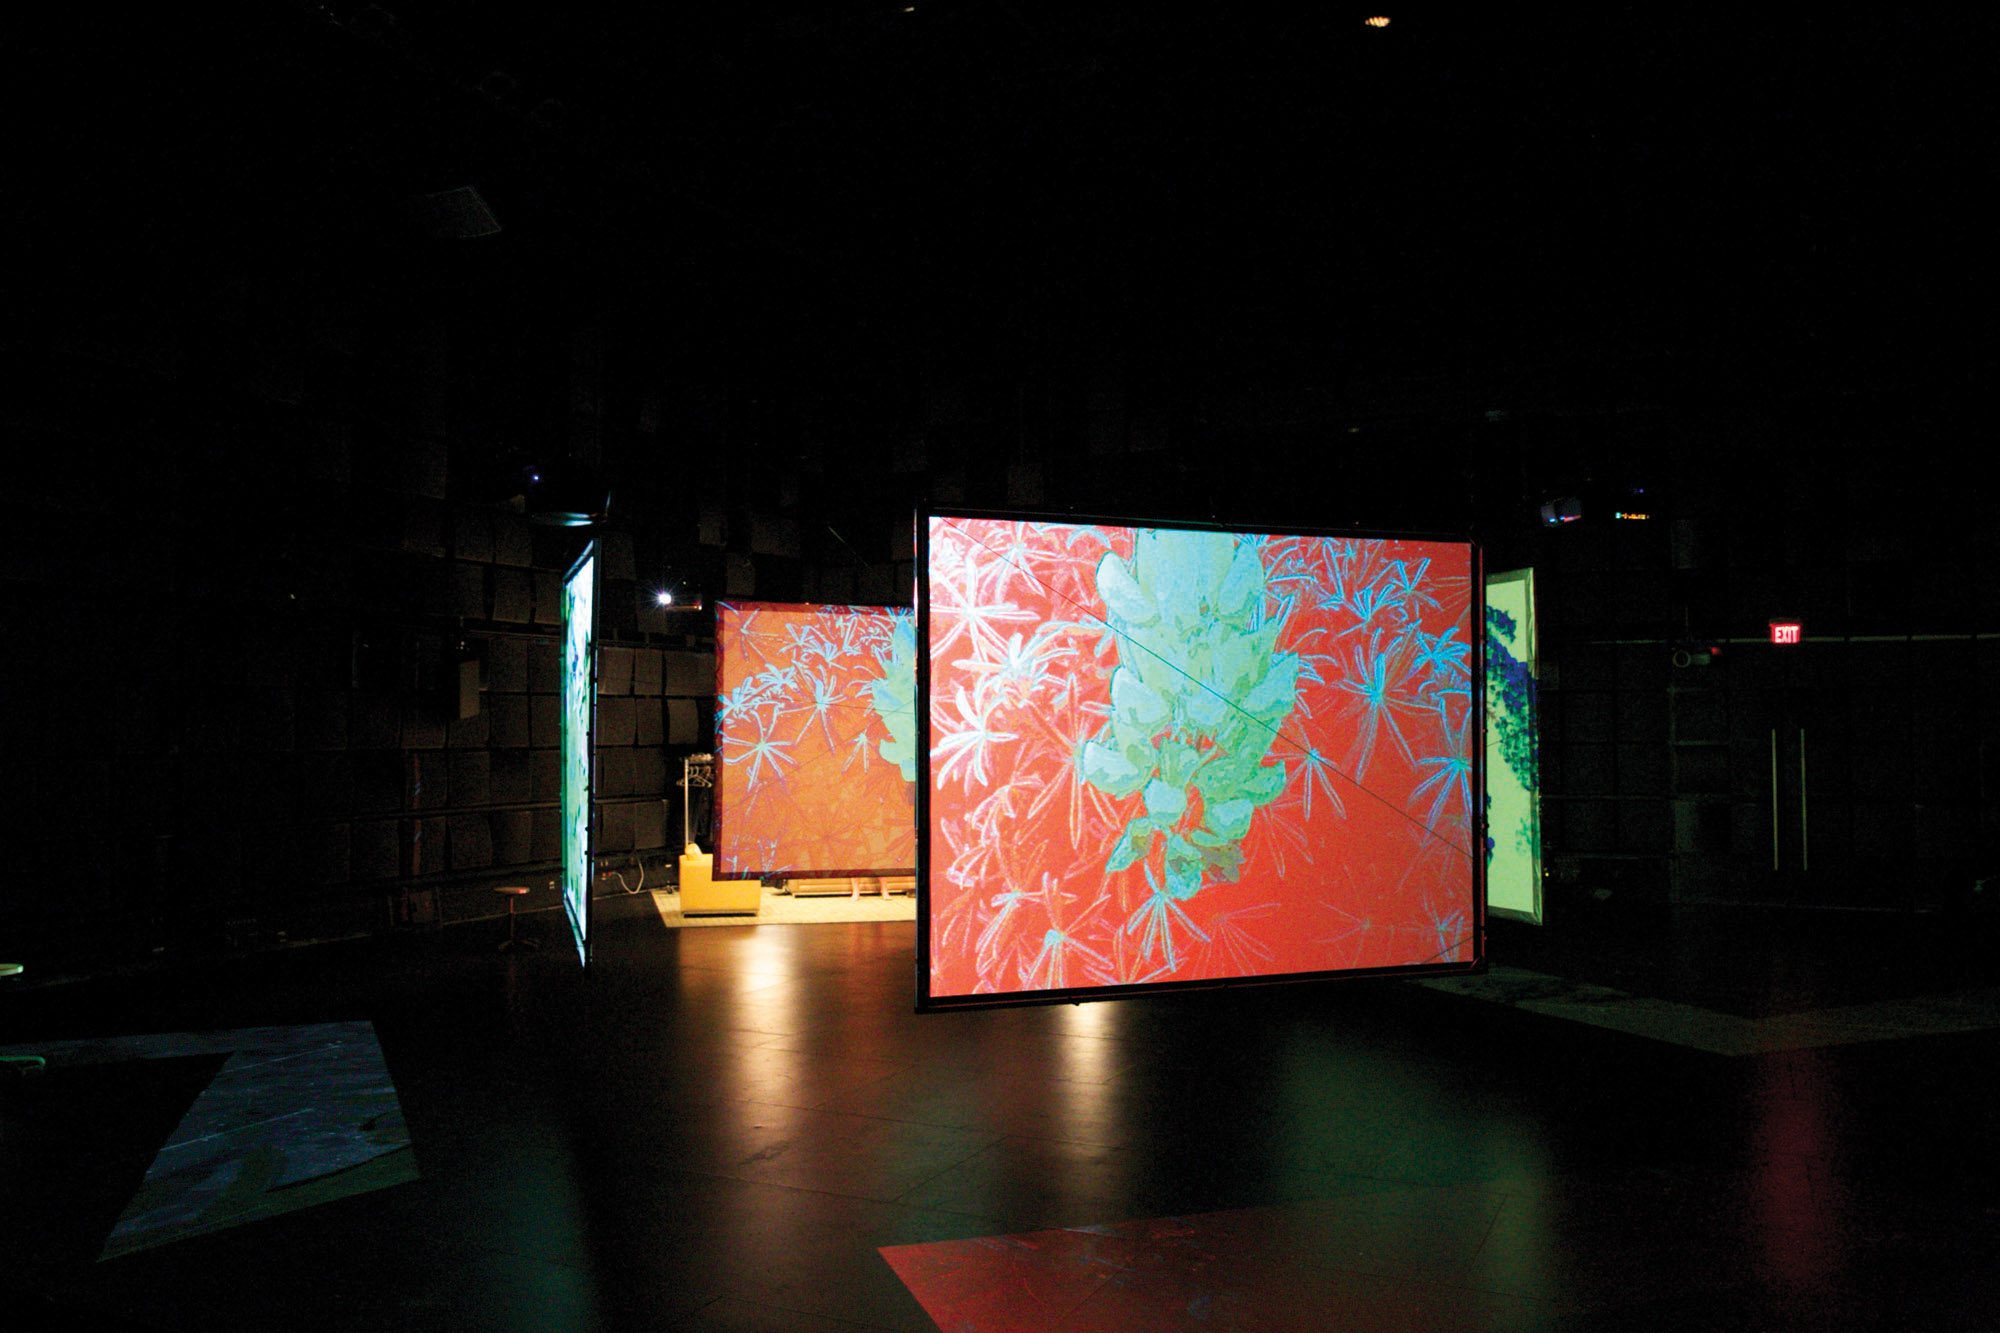 Multipel screens hung in a black box theater depicting red and teal asian inspired flowers. The screens are hung in such a way to create a compartmentalized space. 